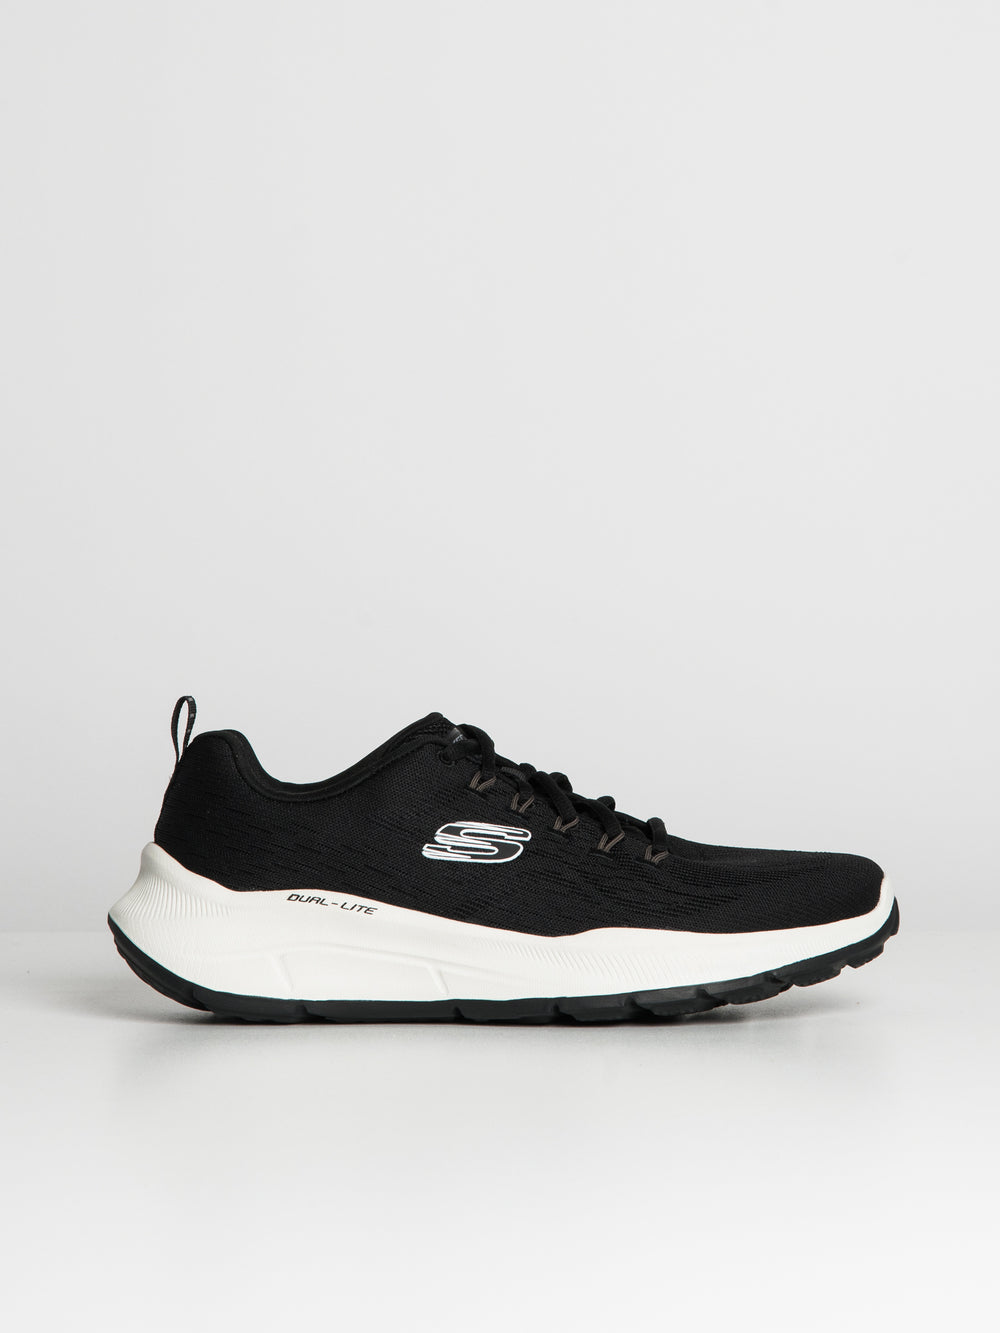 MENS SKECHERS RELAXED FIT EQUALIZER 5.0 - CLEARANCE